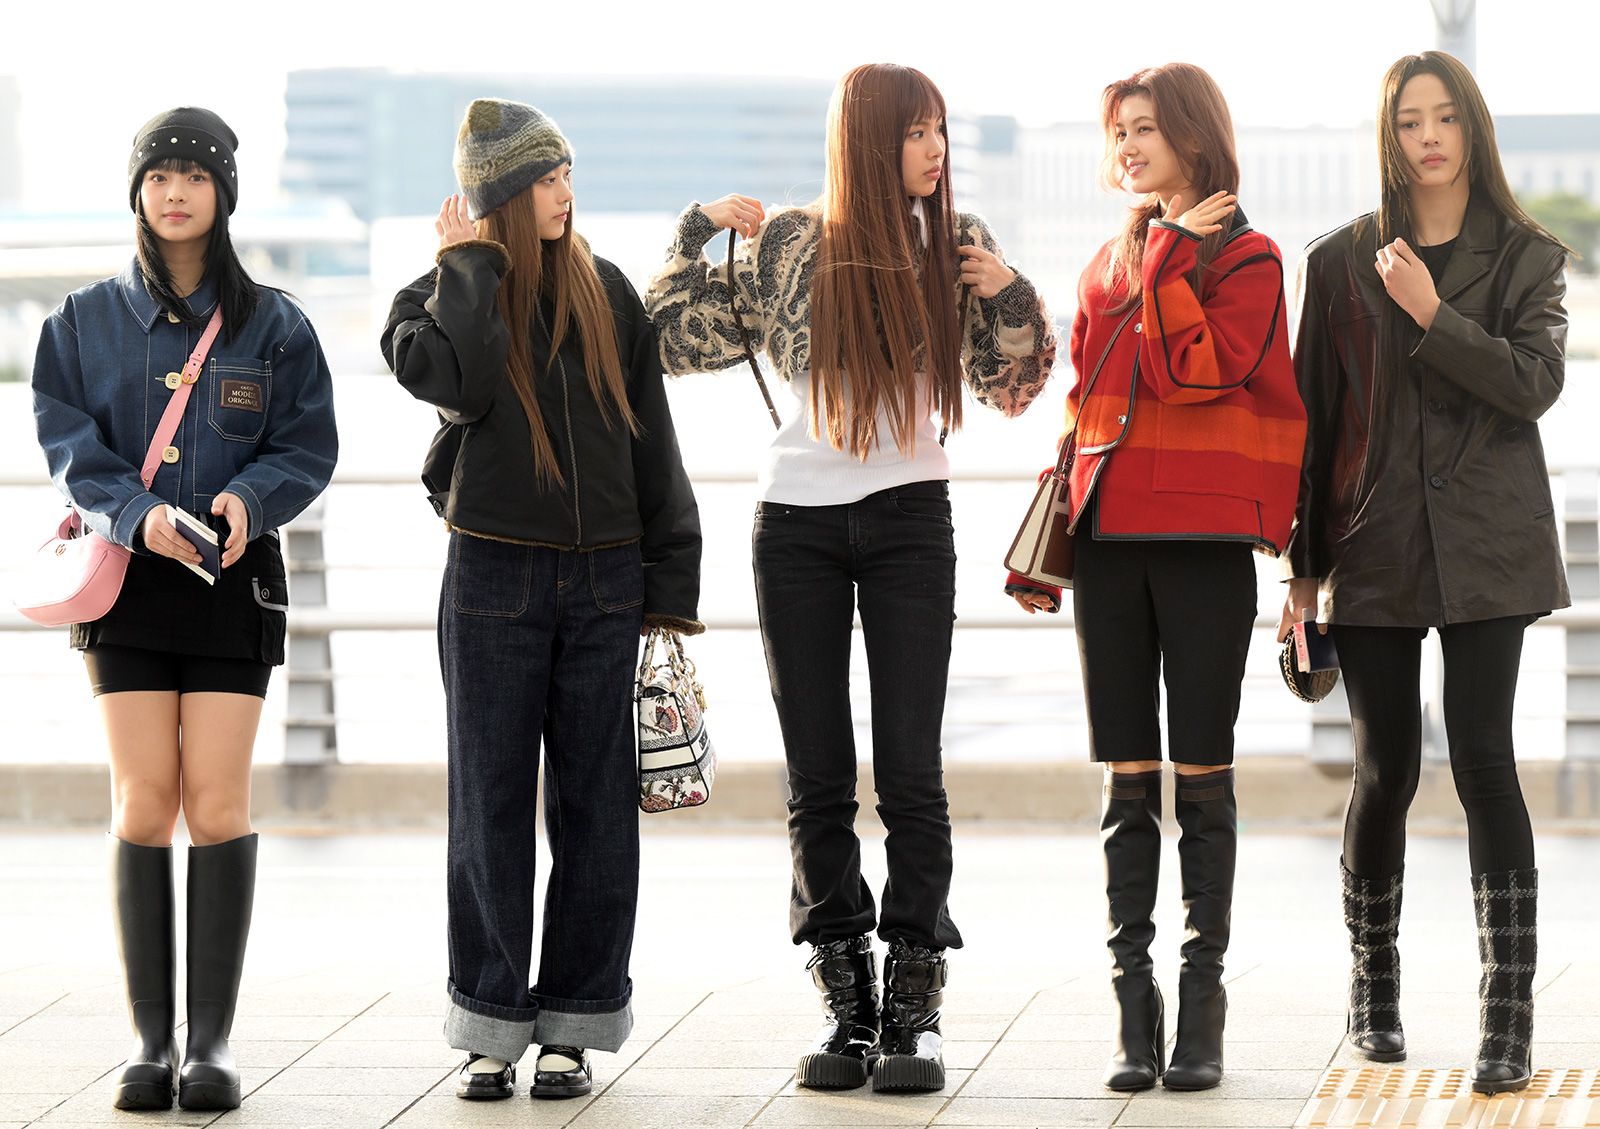 NewJeans: How a K-pop group became an overnight fashion favorite